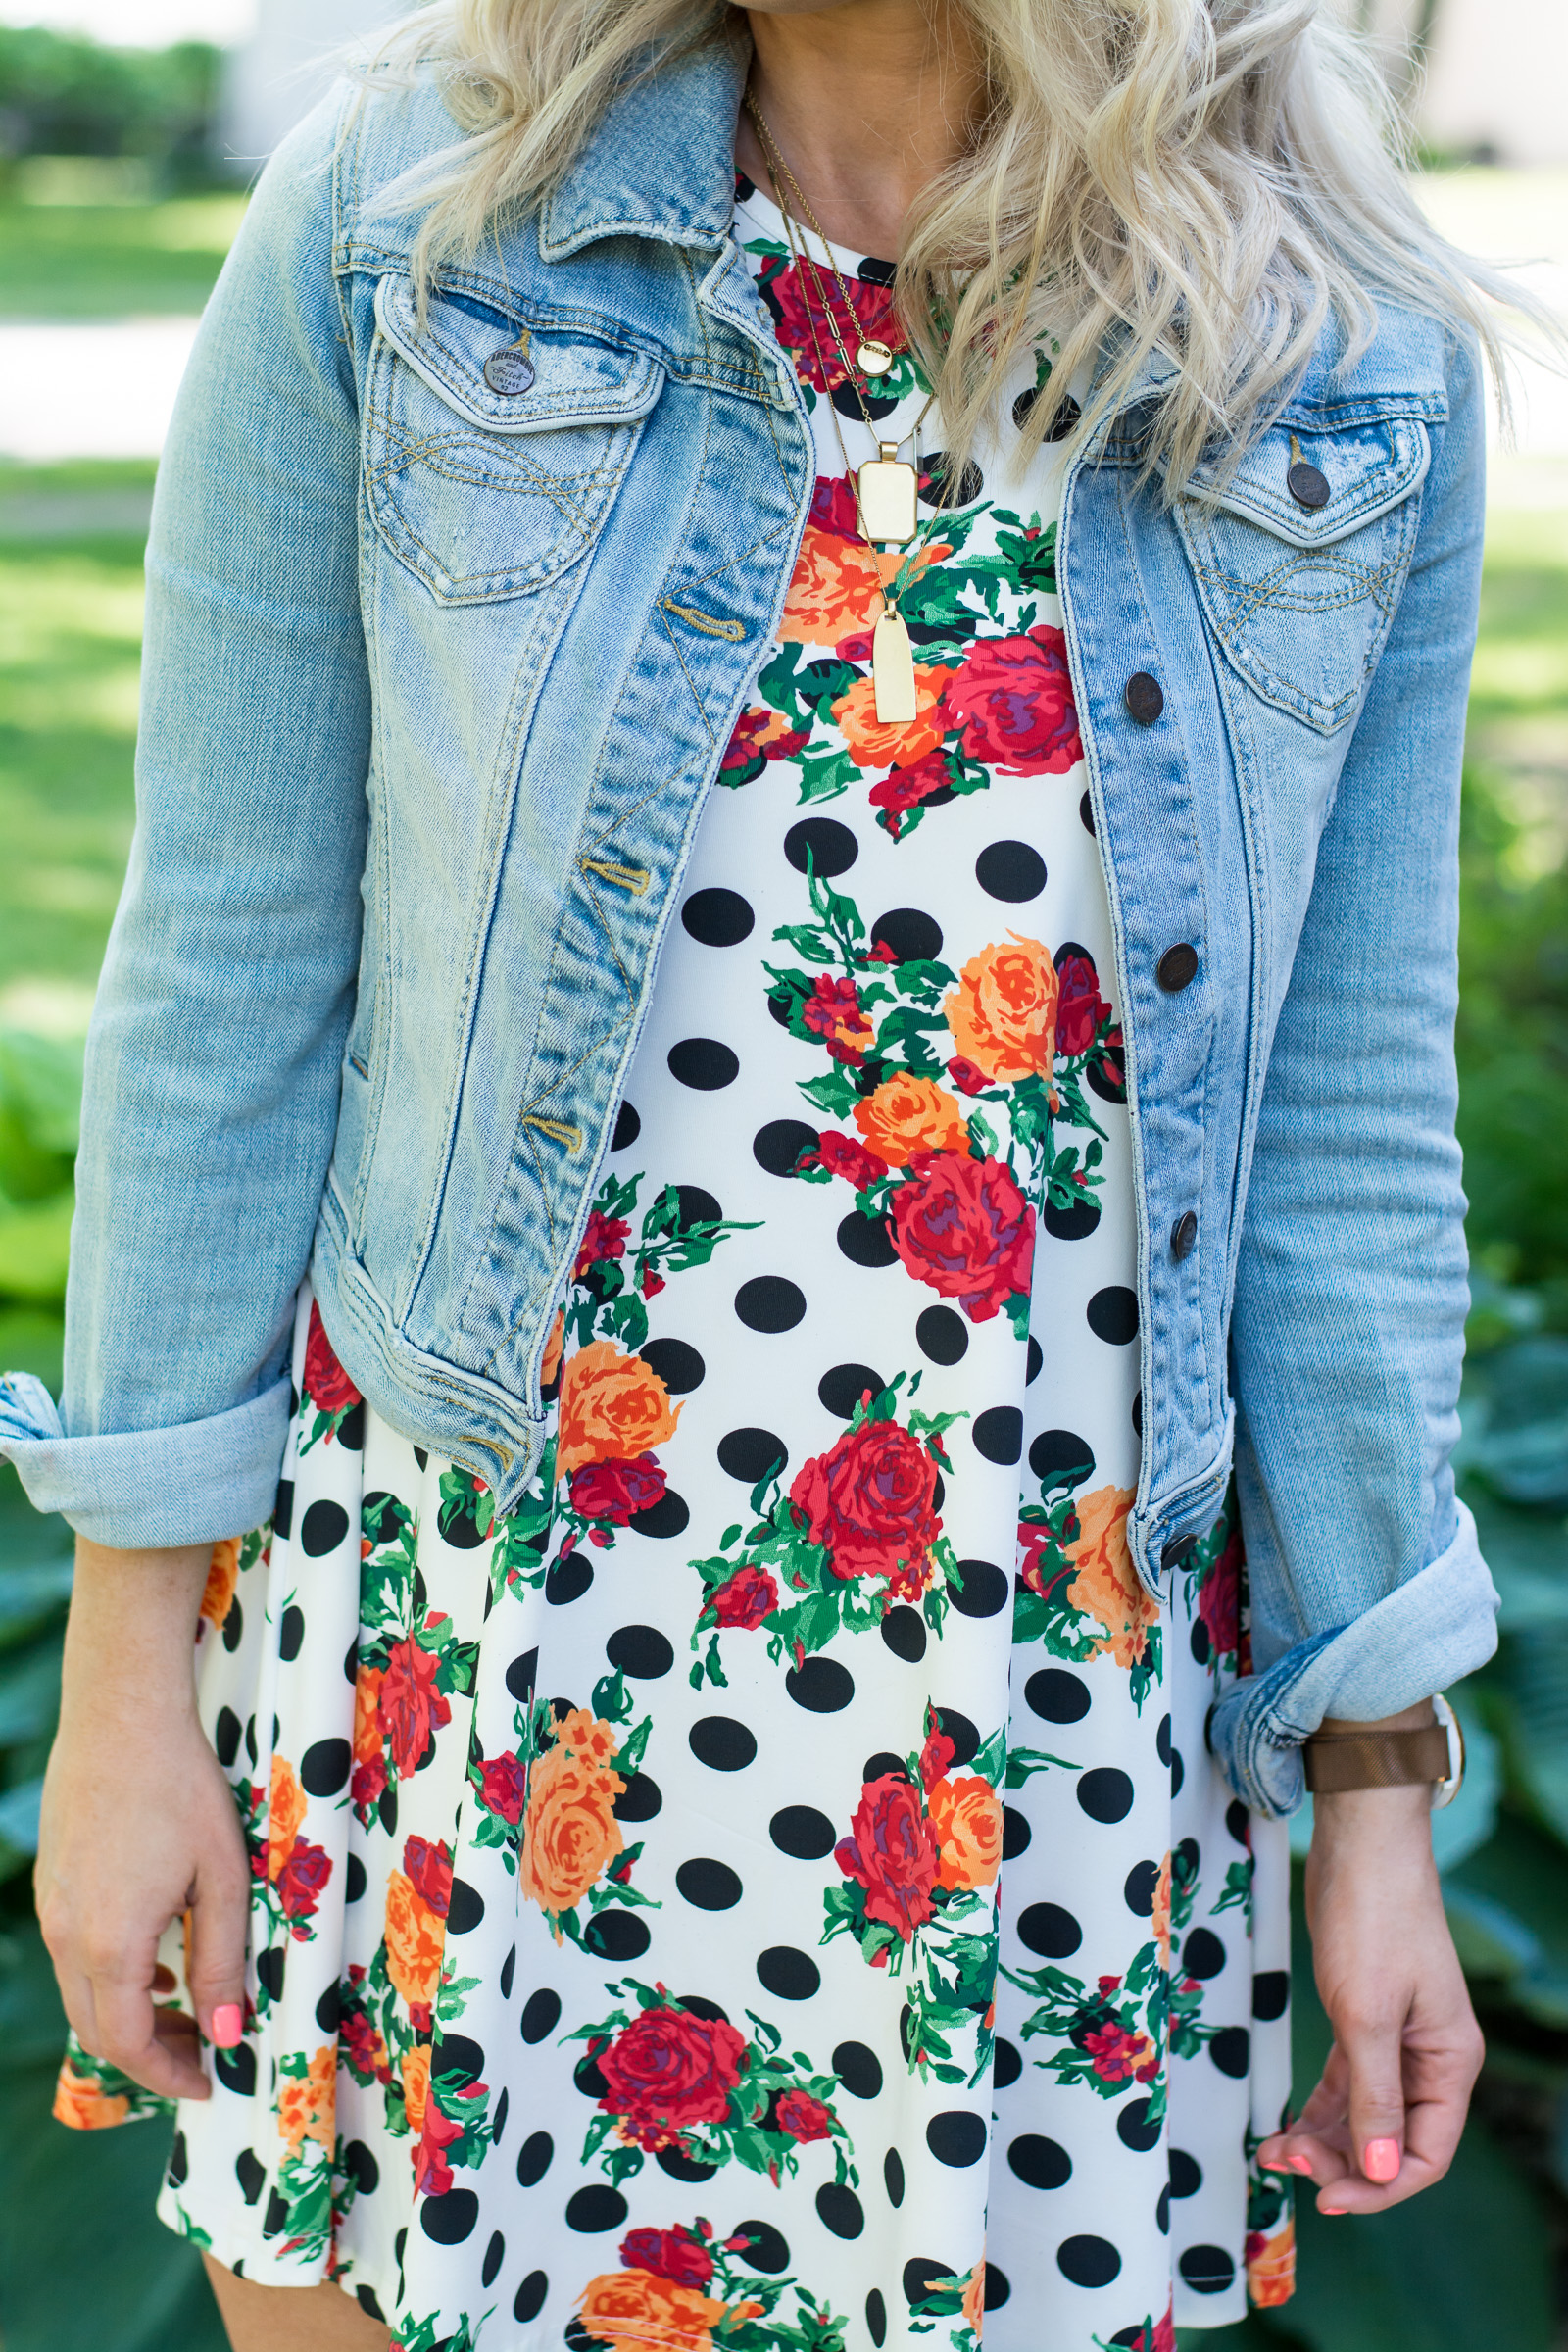 Floral + Polka Dot Swing Dress with a Jean Jacket. | Le Stylo Rouge